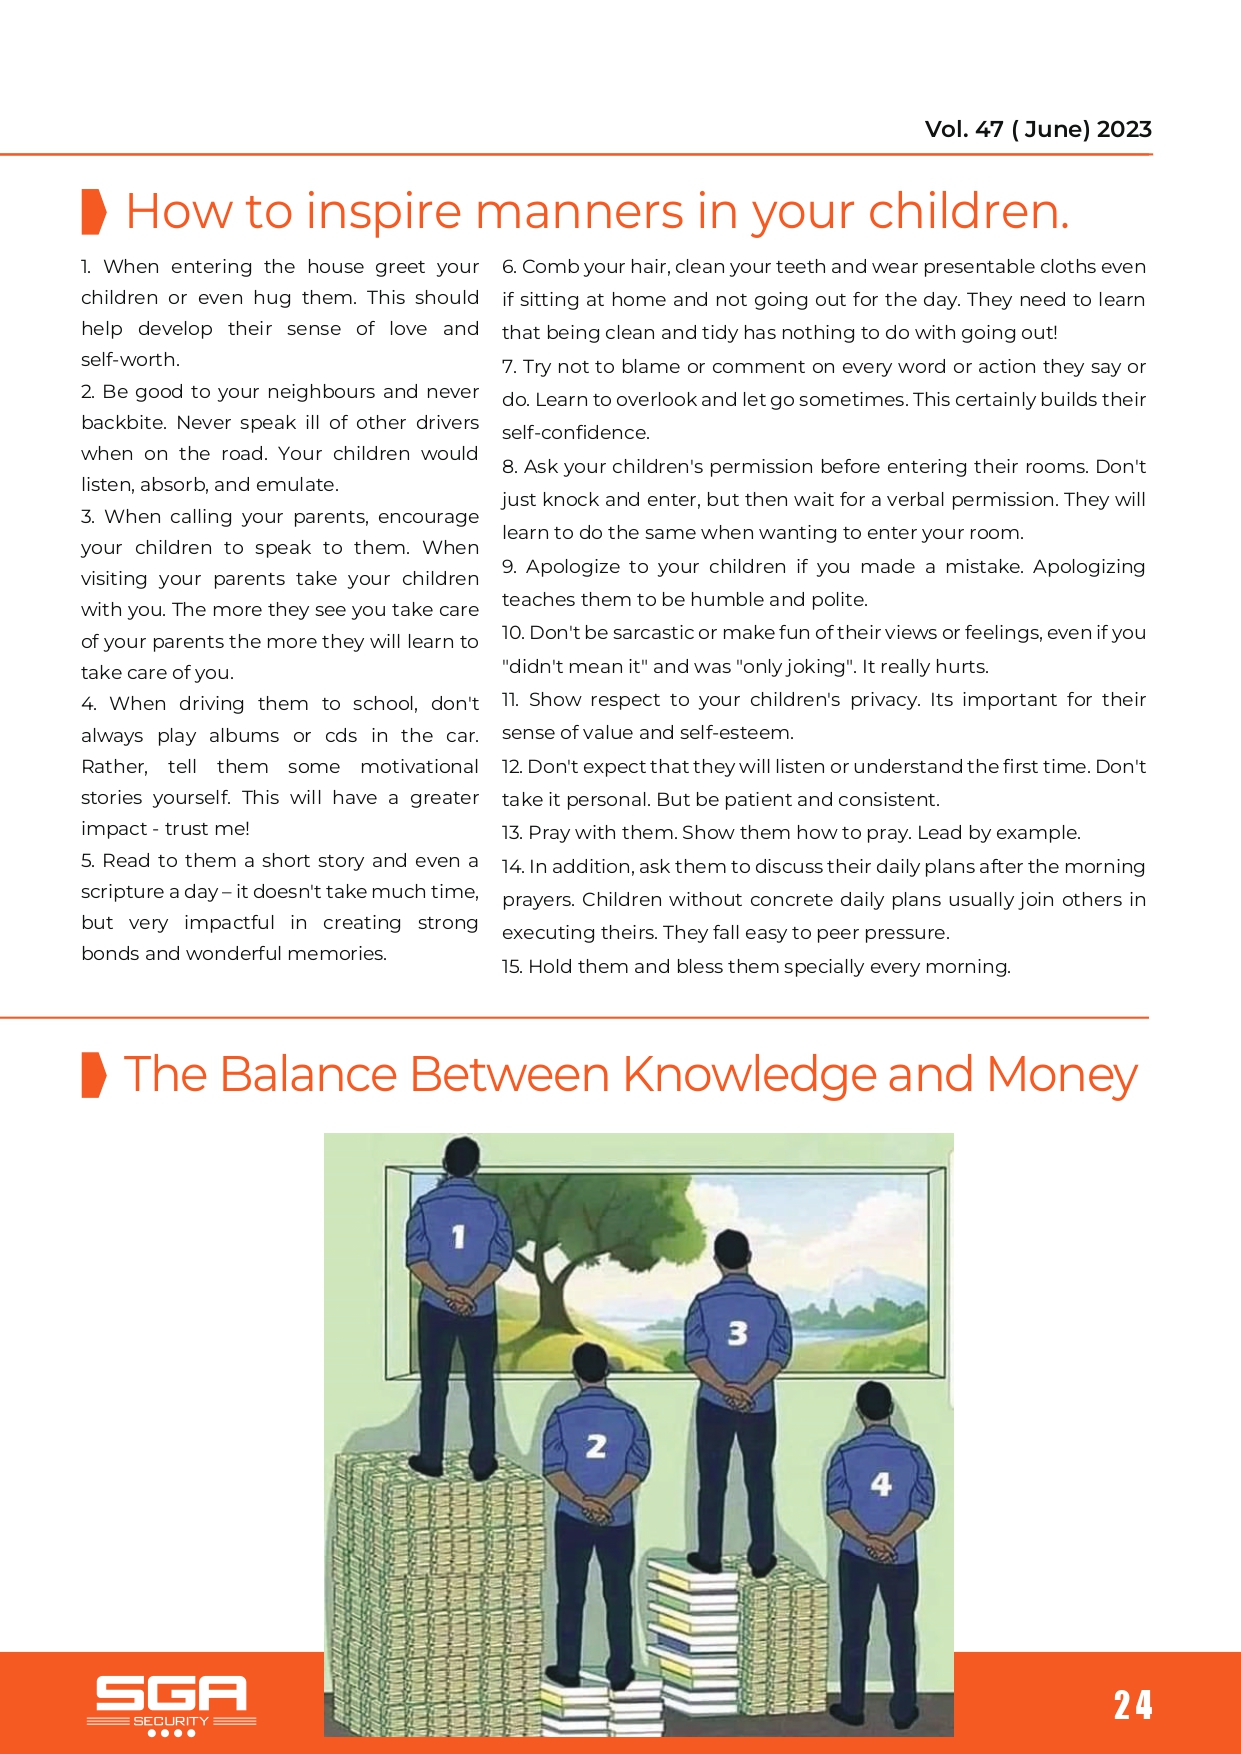 Illustration of the balance between knowledge and money